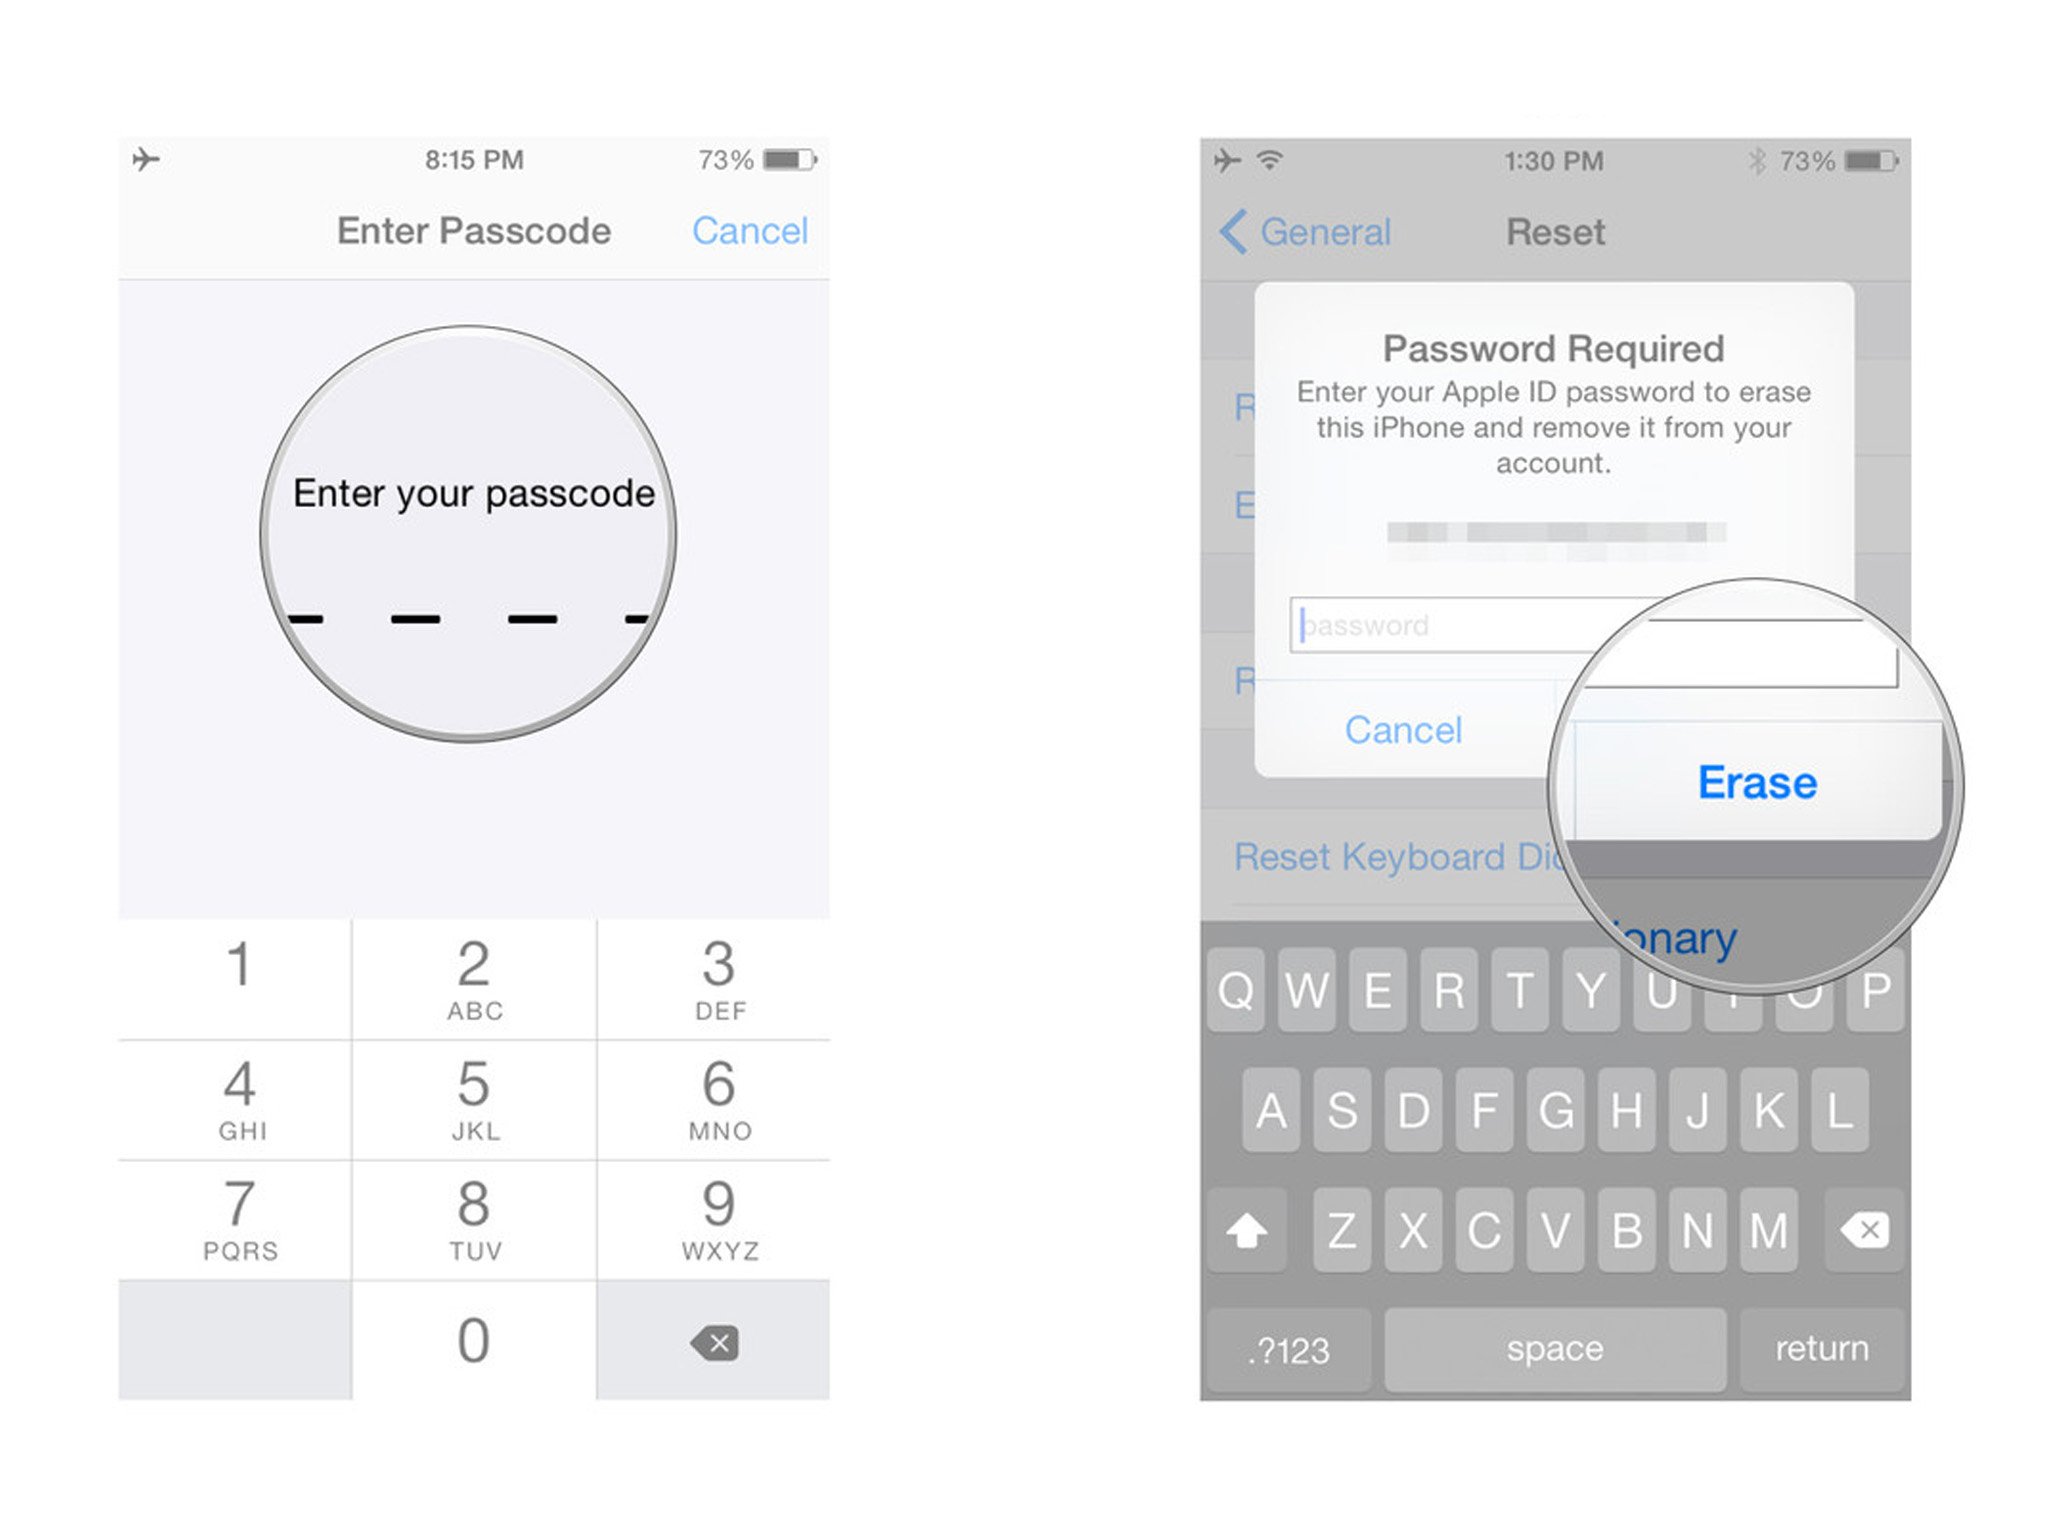 Erasing your personal data, showing how to enter your passcode, then enter your Apple ID password